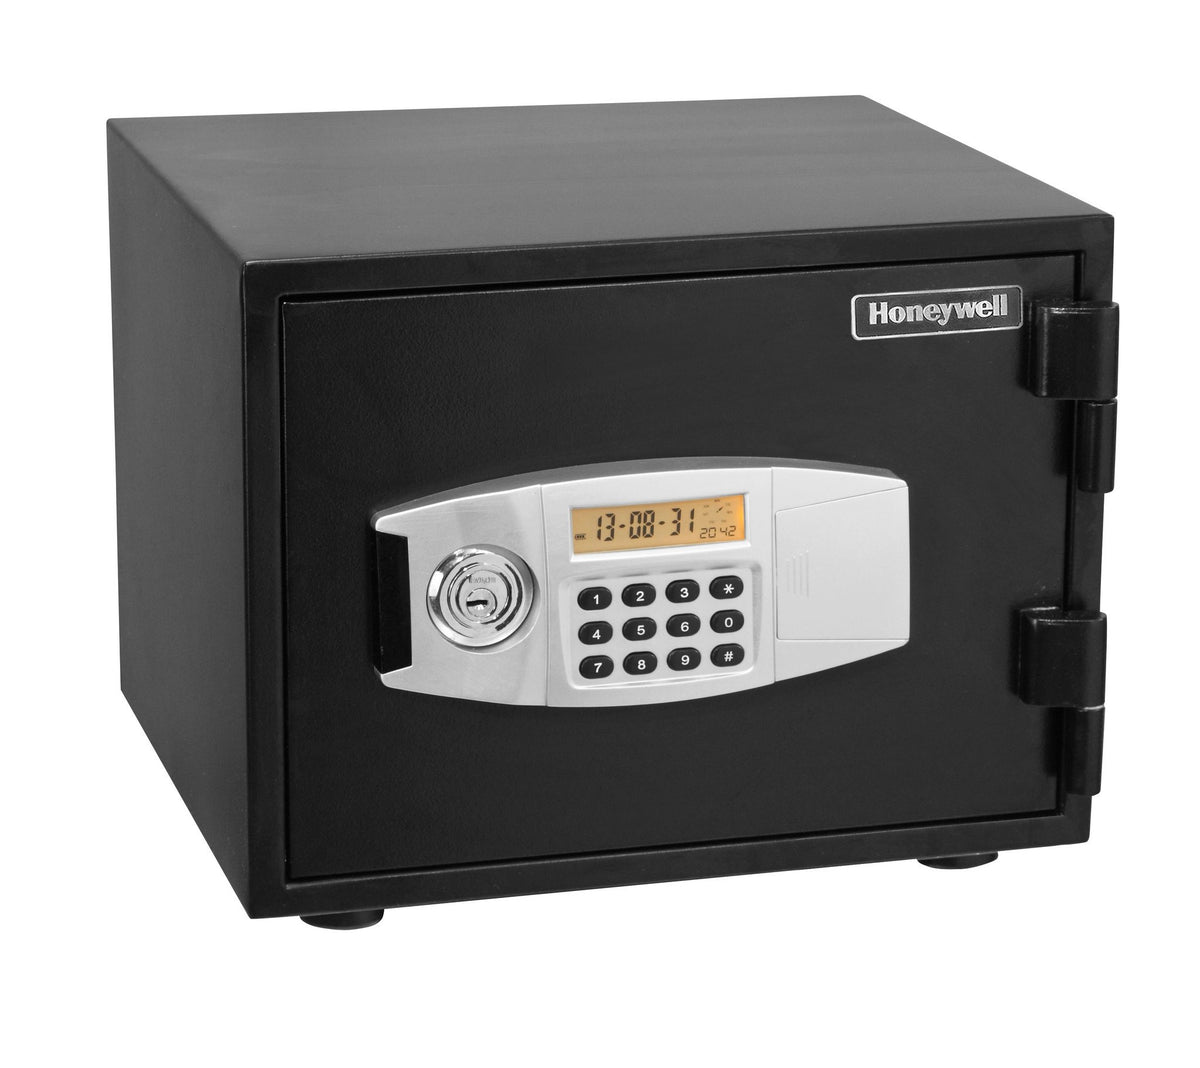 Honeywell 2111 Water Resistant Steel Fire &amp; Security Safe